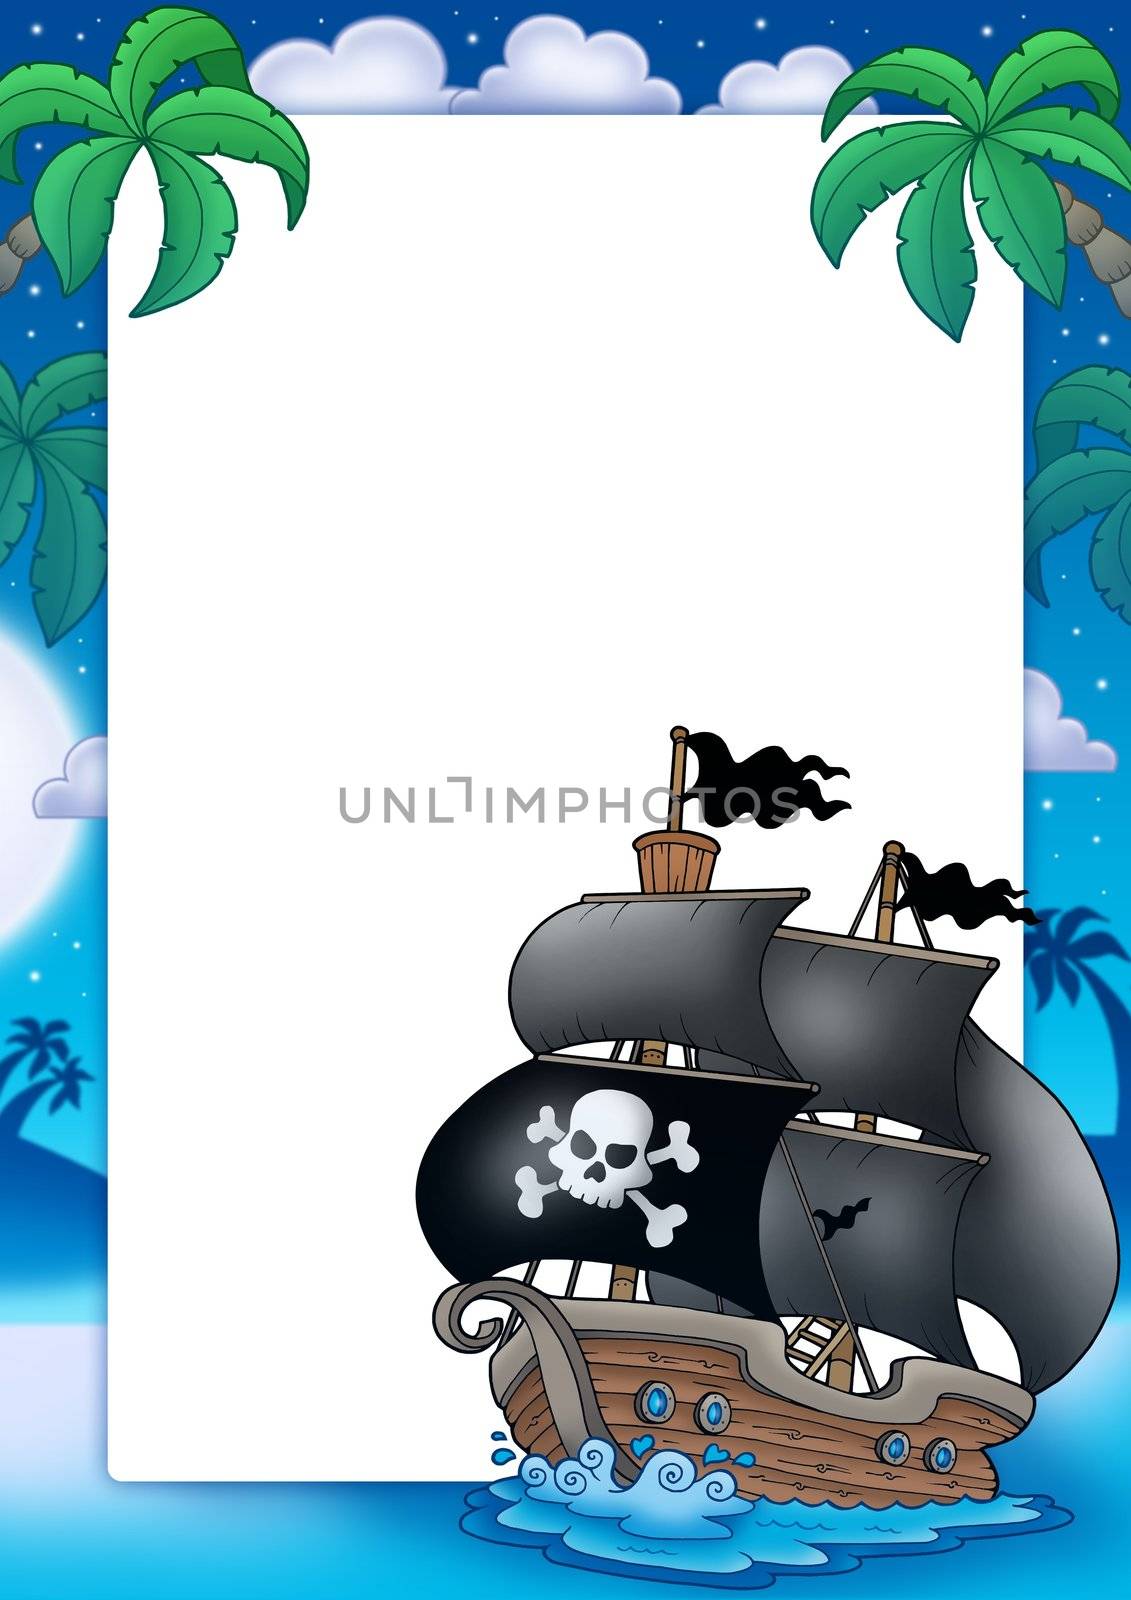 Pirate frame with sailboat at night - color illustration.